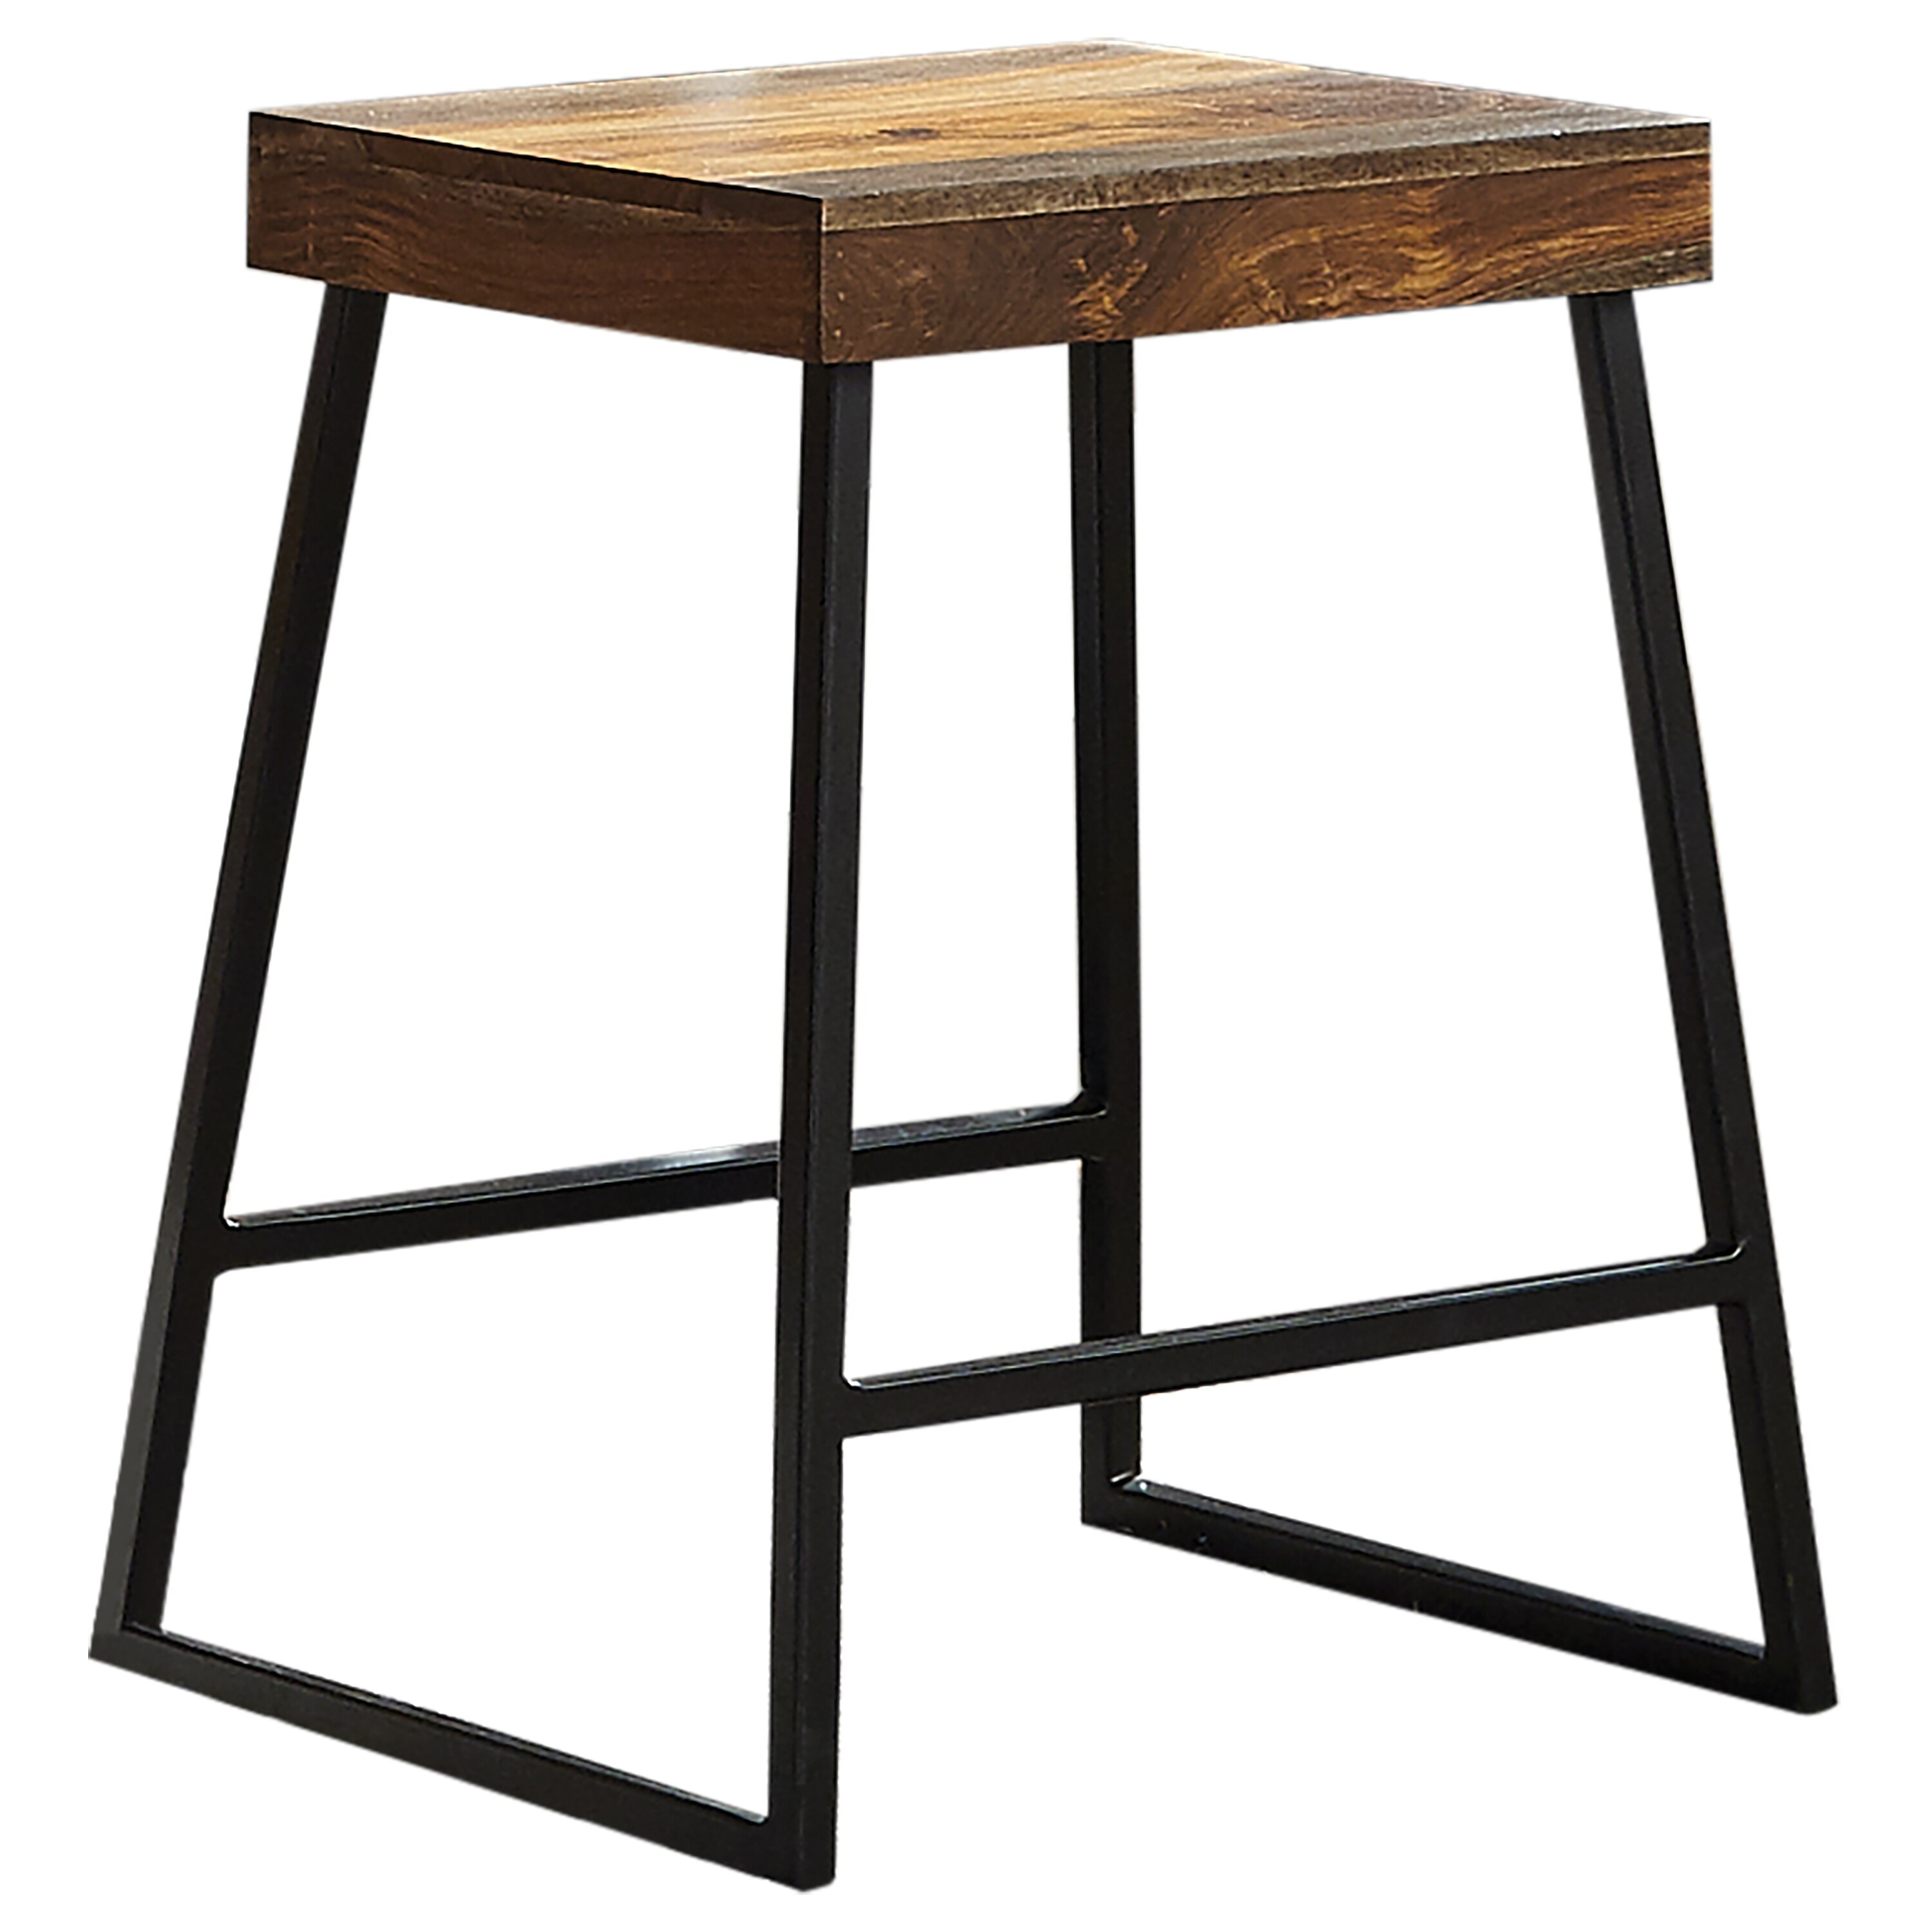 Rustic Plank Design Counter Height Stool